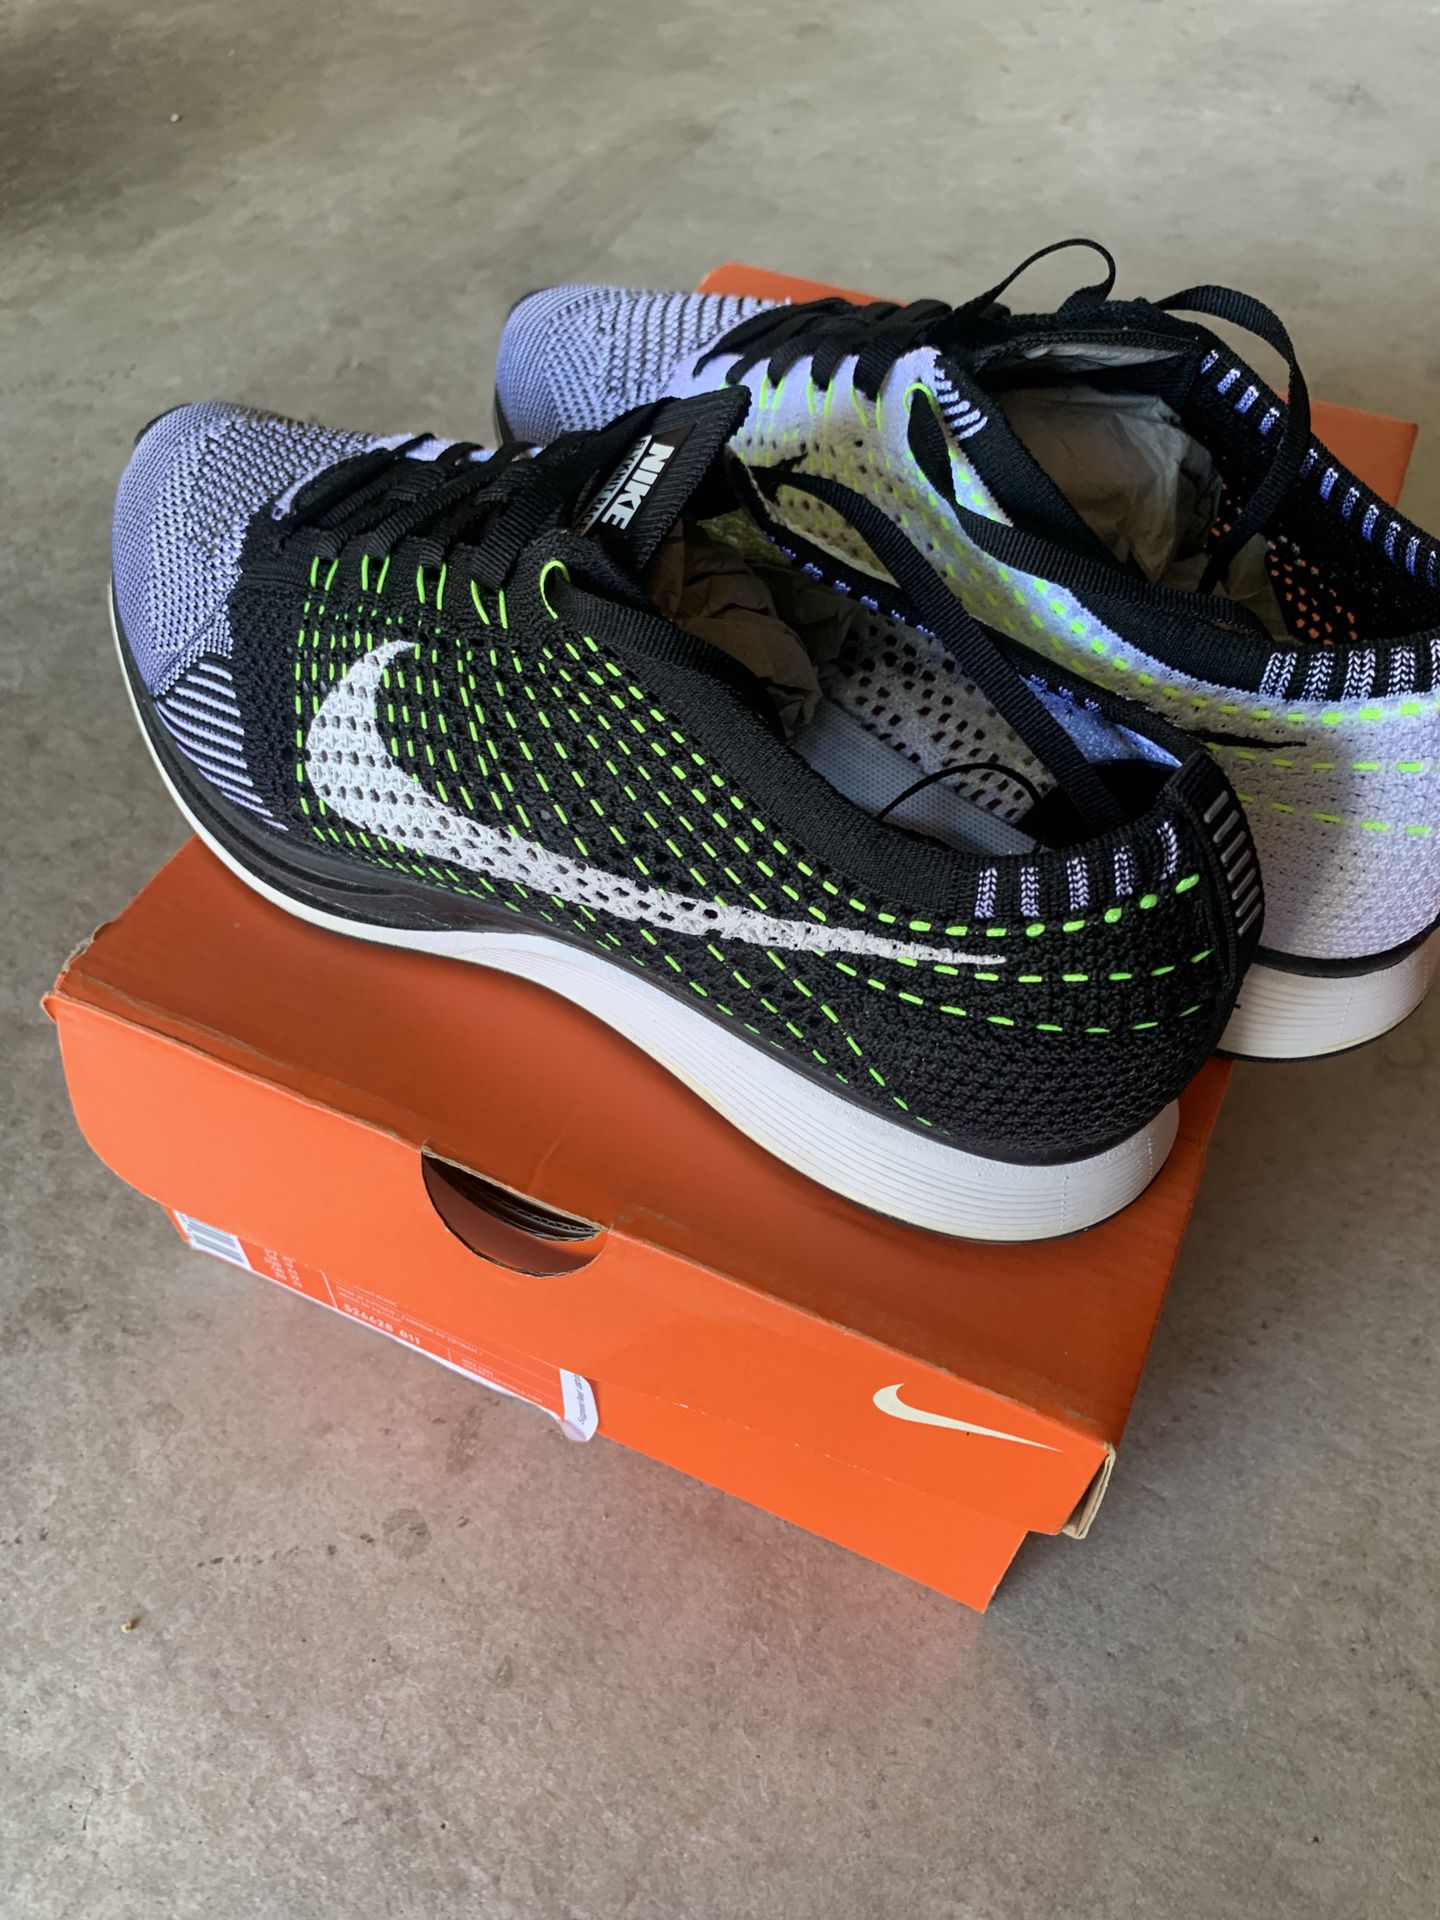 Nike Flyknit Racer Orca Volt for Sale in Reno, NV -